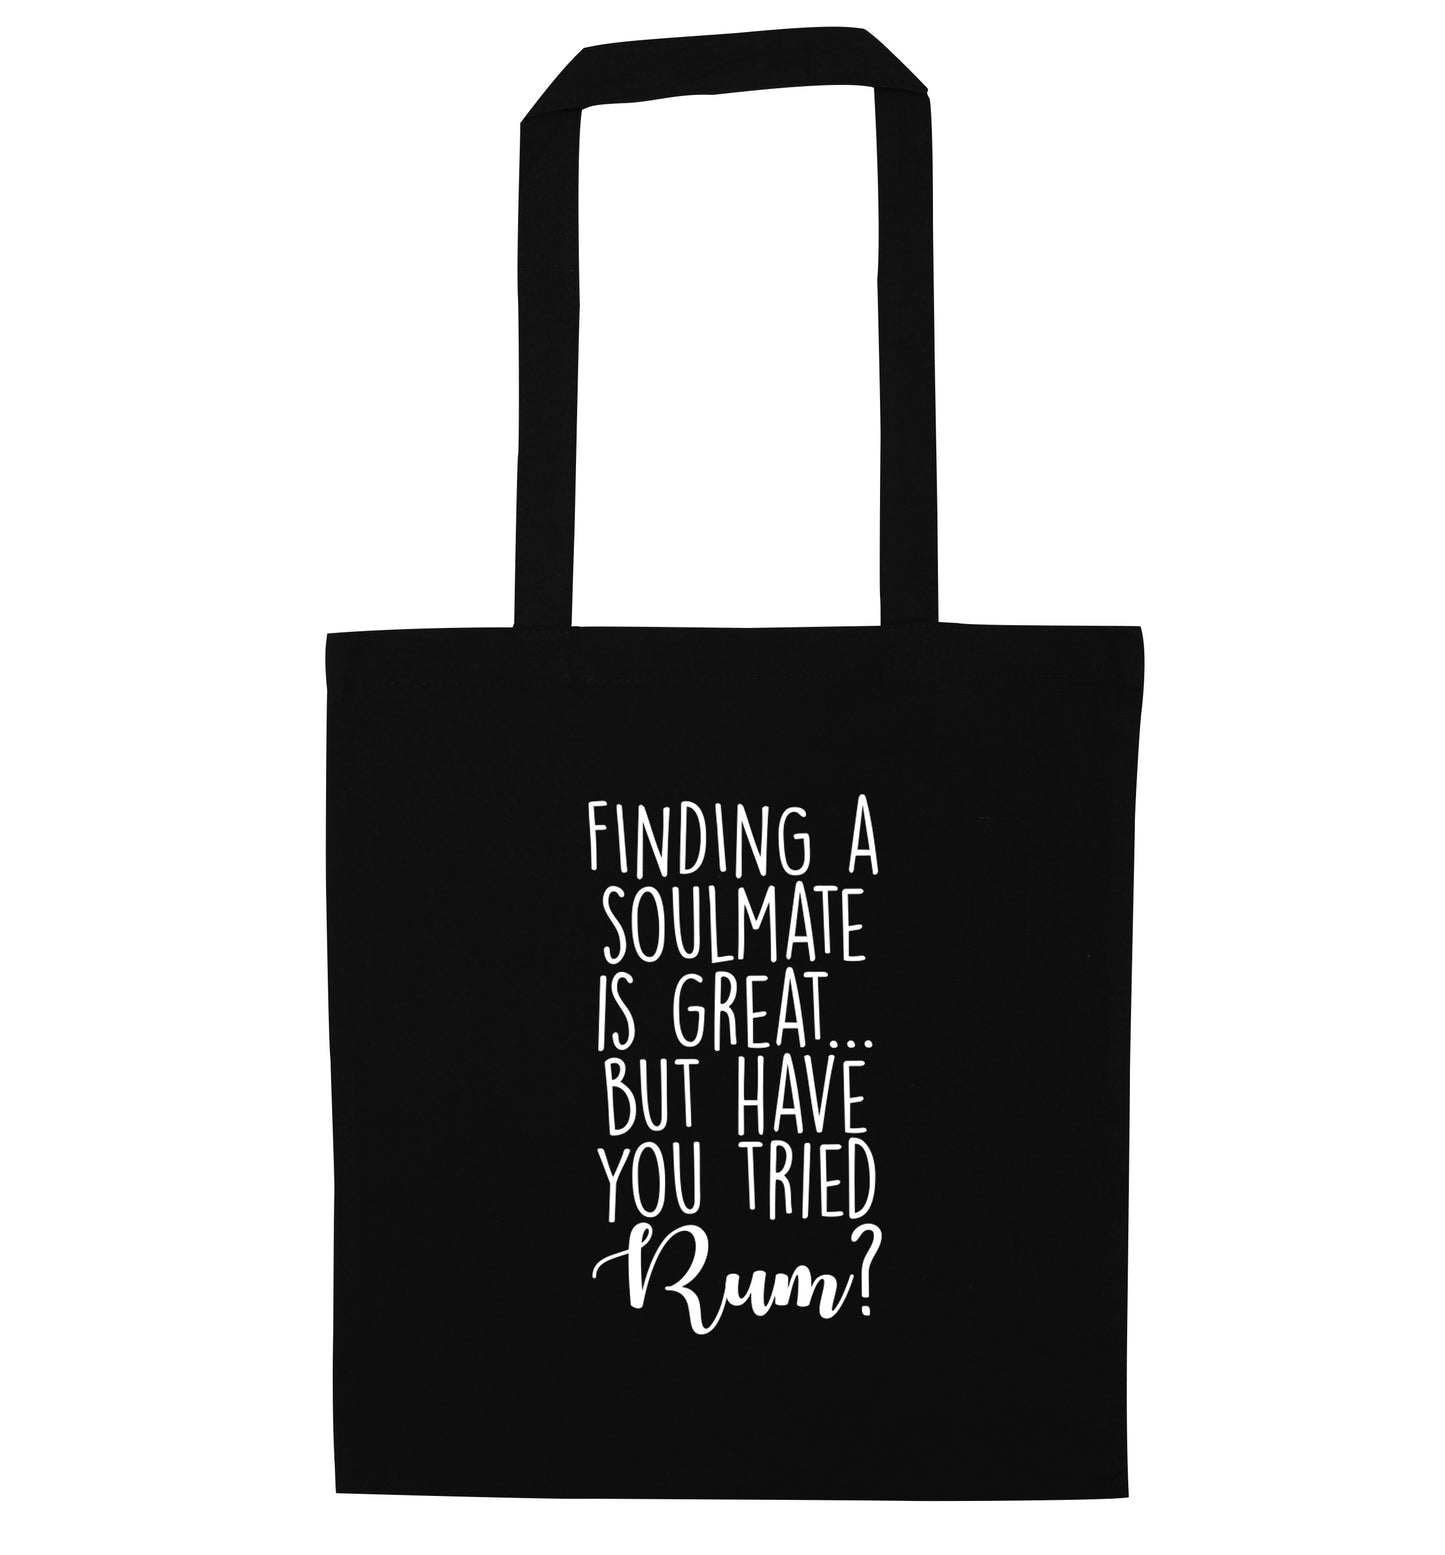 Finding a soulmate is great but have you tried rum? black tote bag